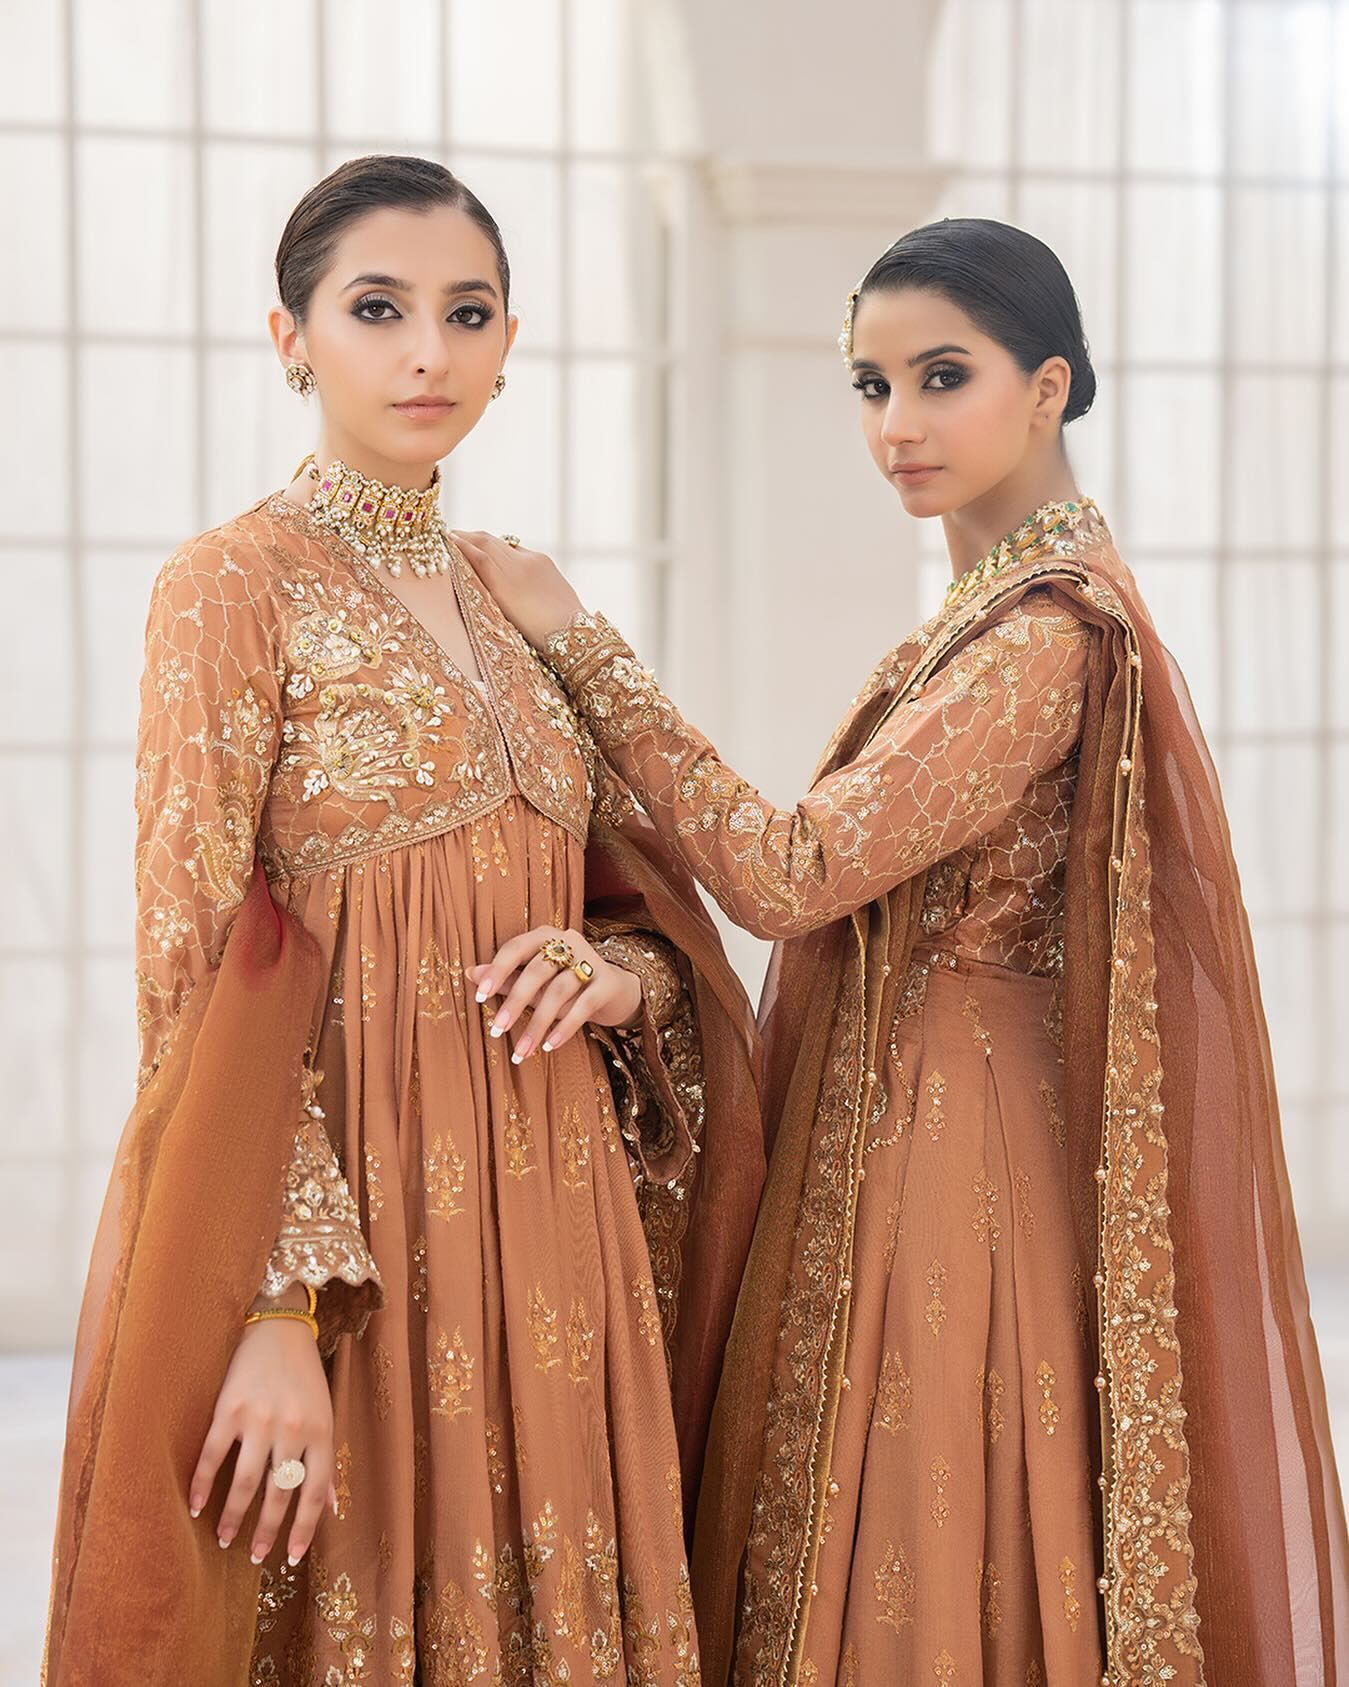 Ethnic Salwar Kameez: Tradition Meets Contemporary Fashion